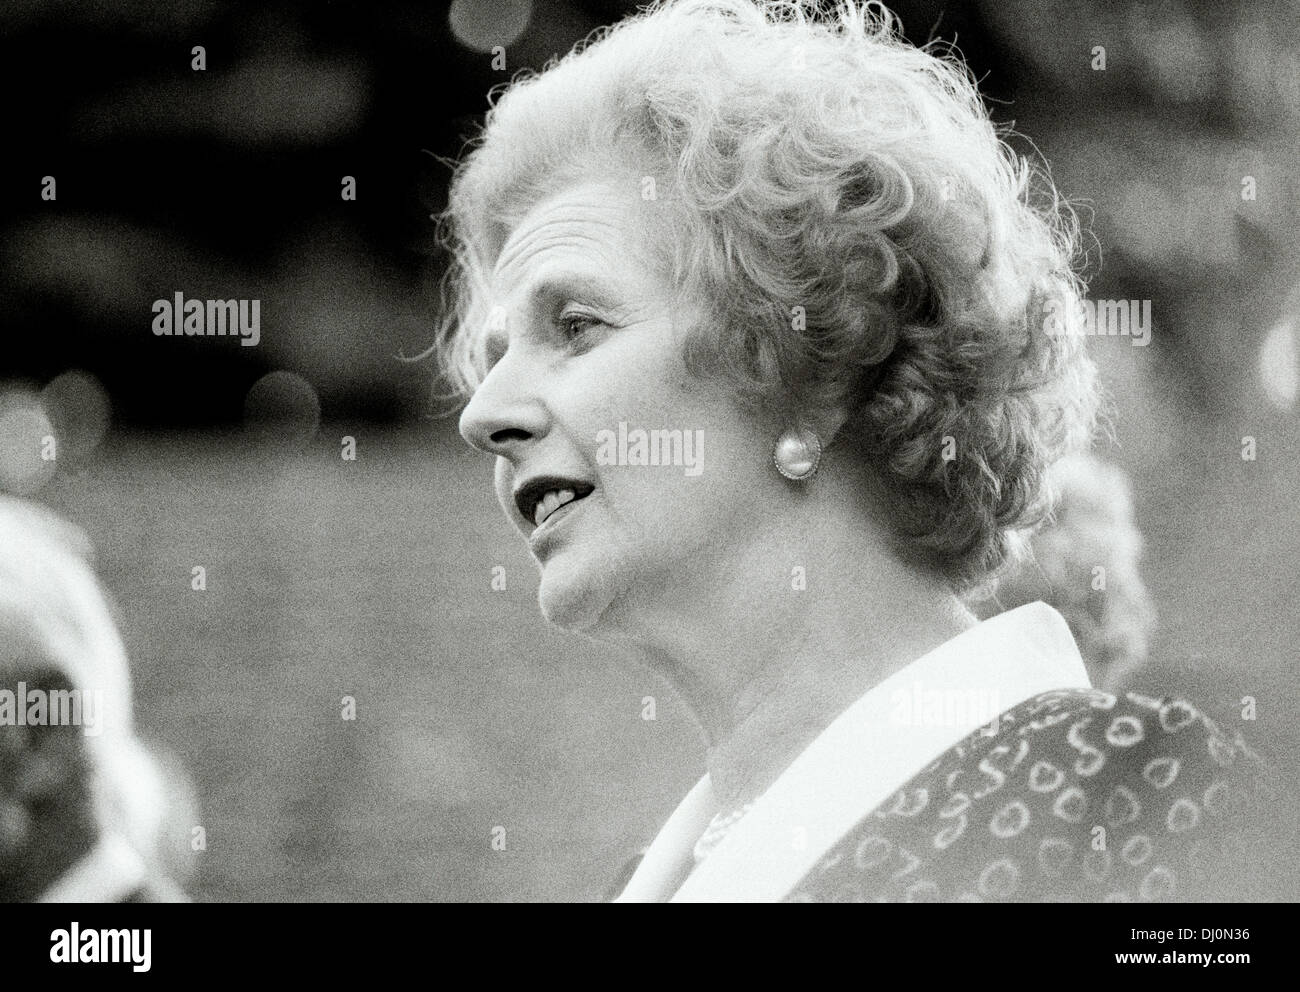 Former Conservative or Tory MP and Prime Minister Margaret Thatcher. Politician and former Member of Parliament Stock Photo